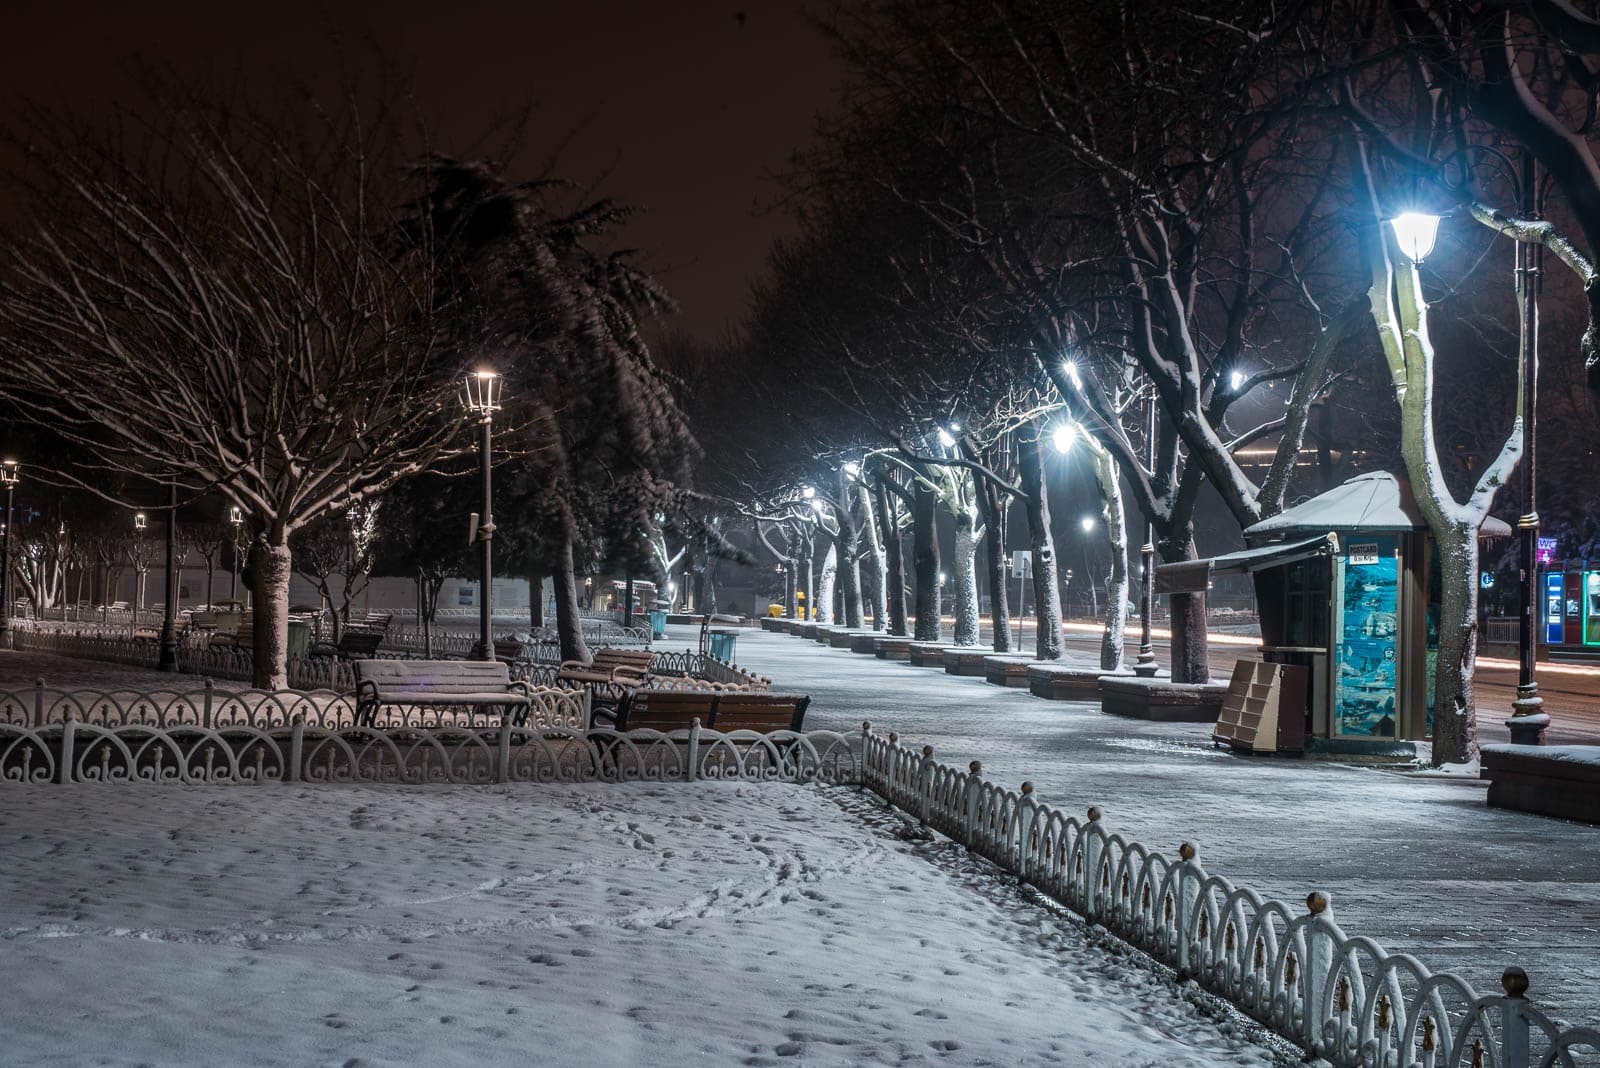 A snow covered park at night with street lights.